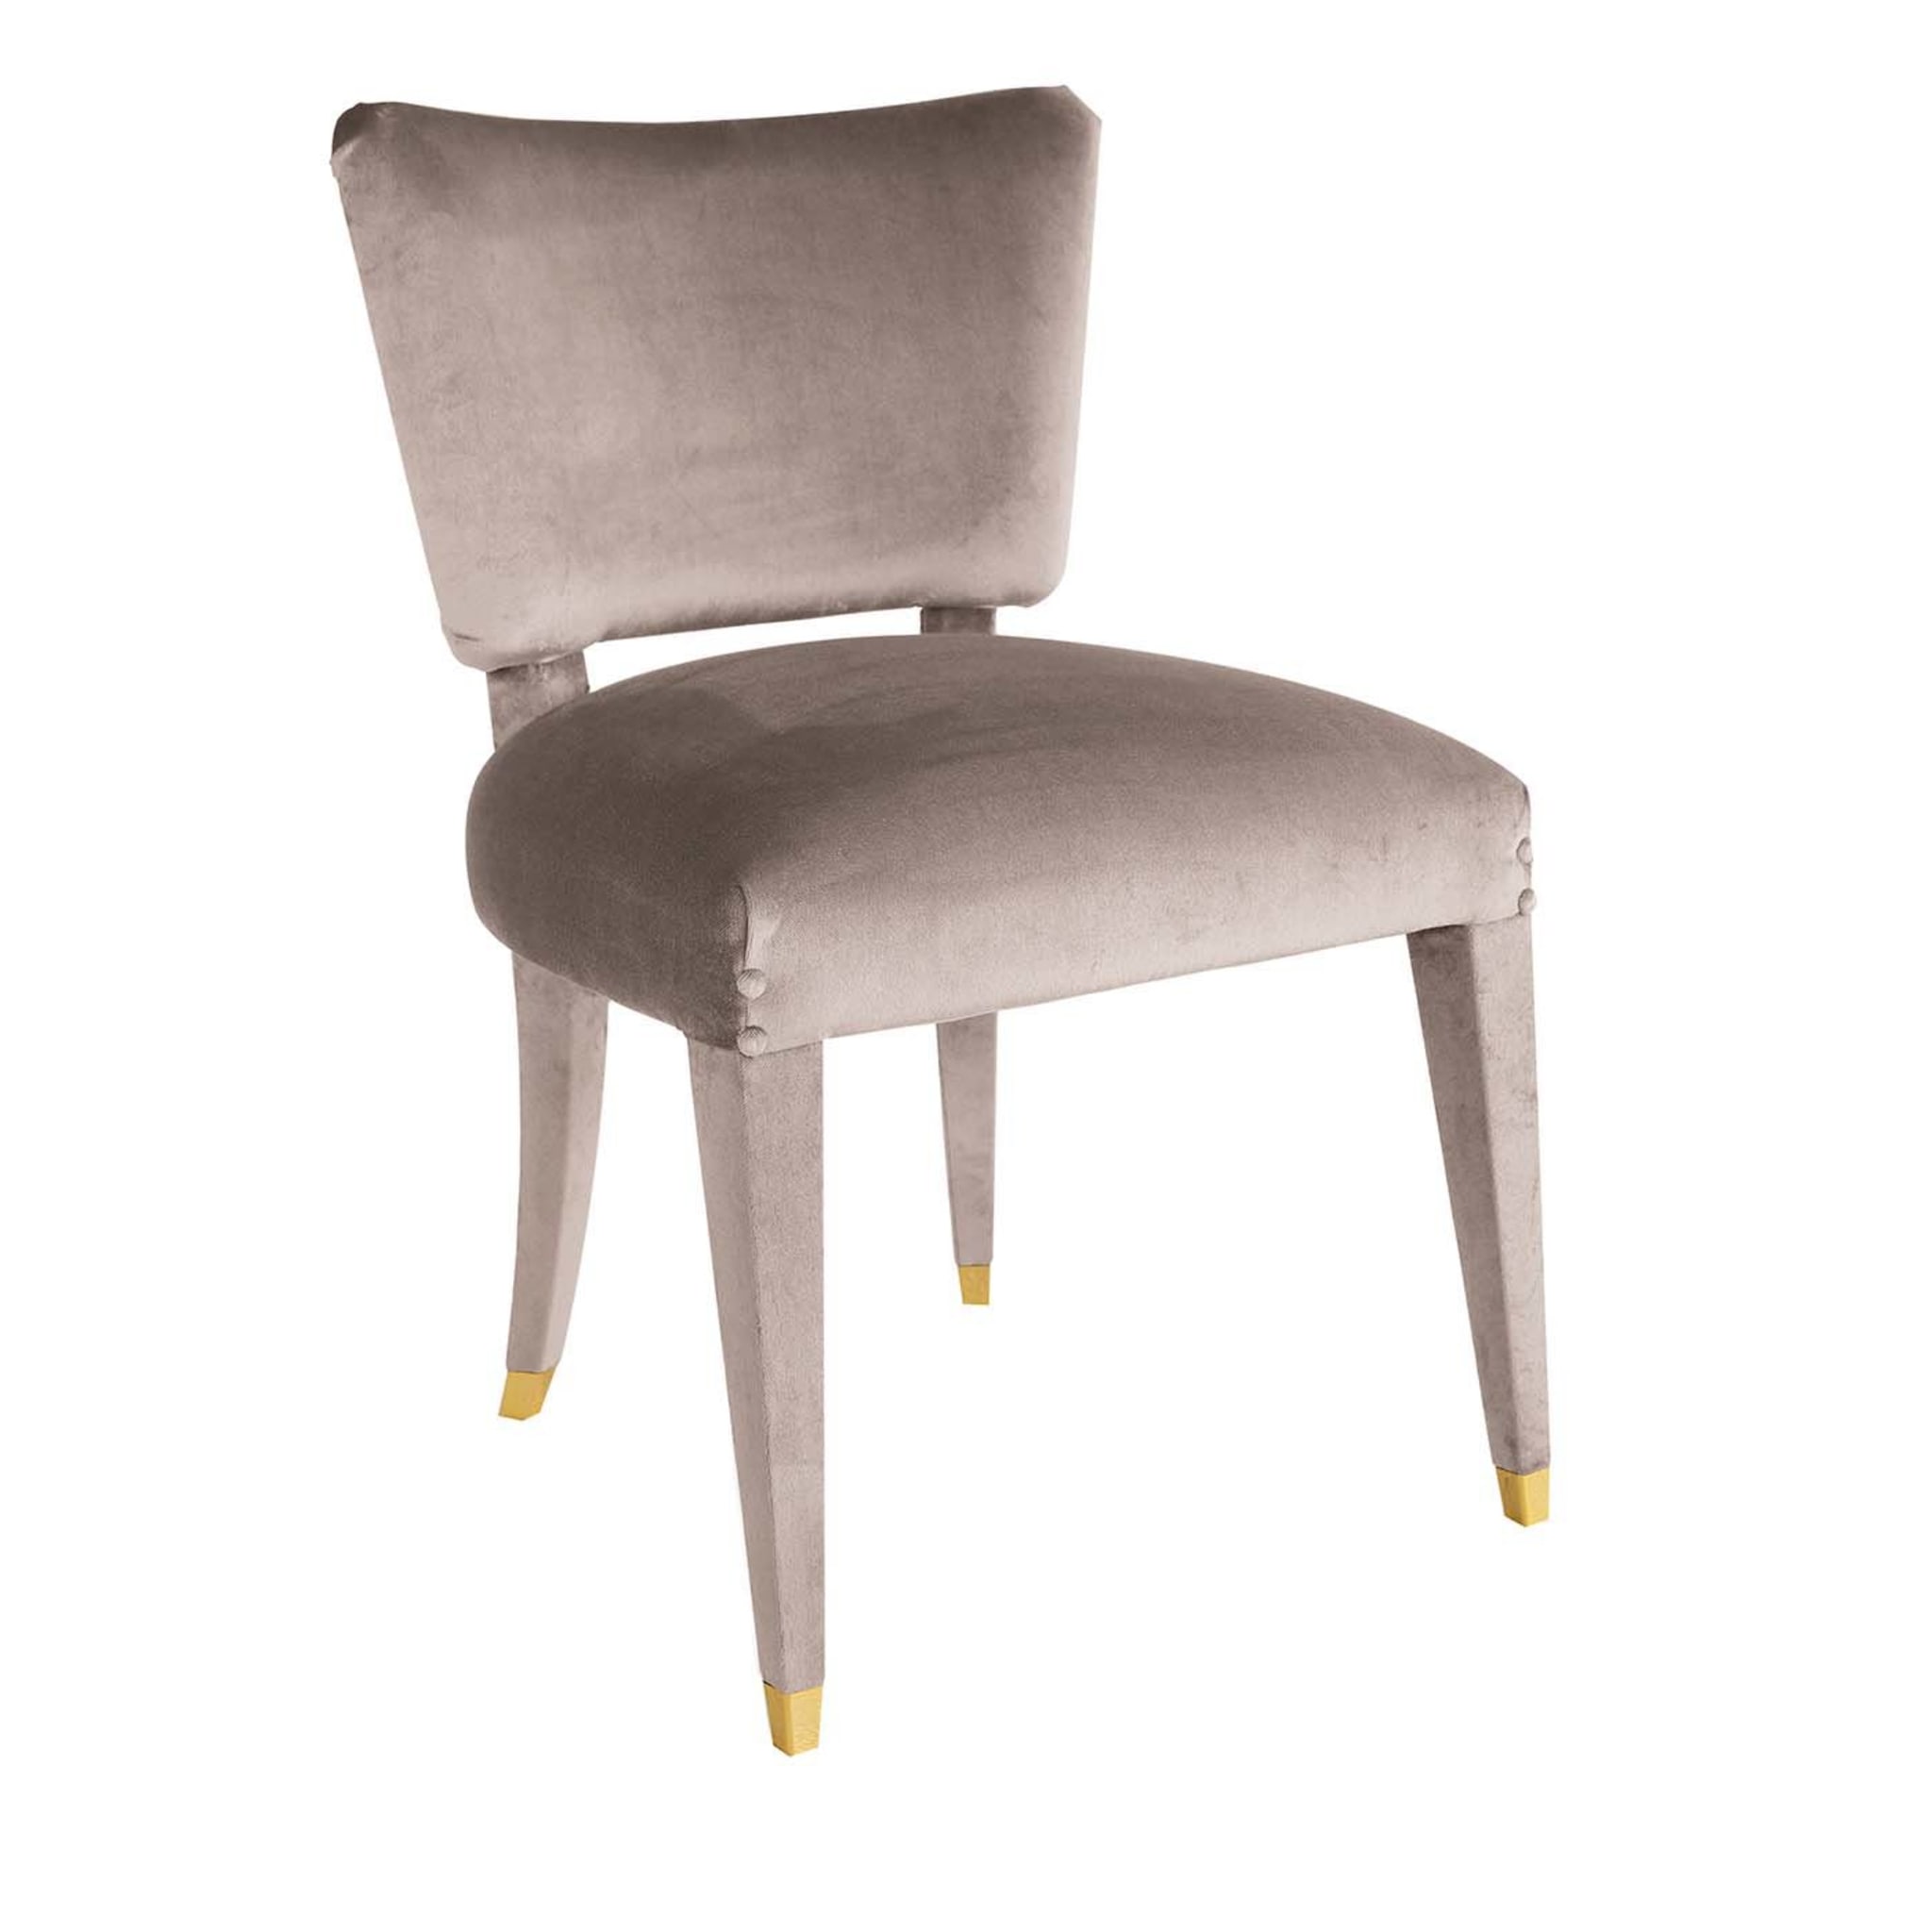 Class Gray Dining Chair - Main view